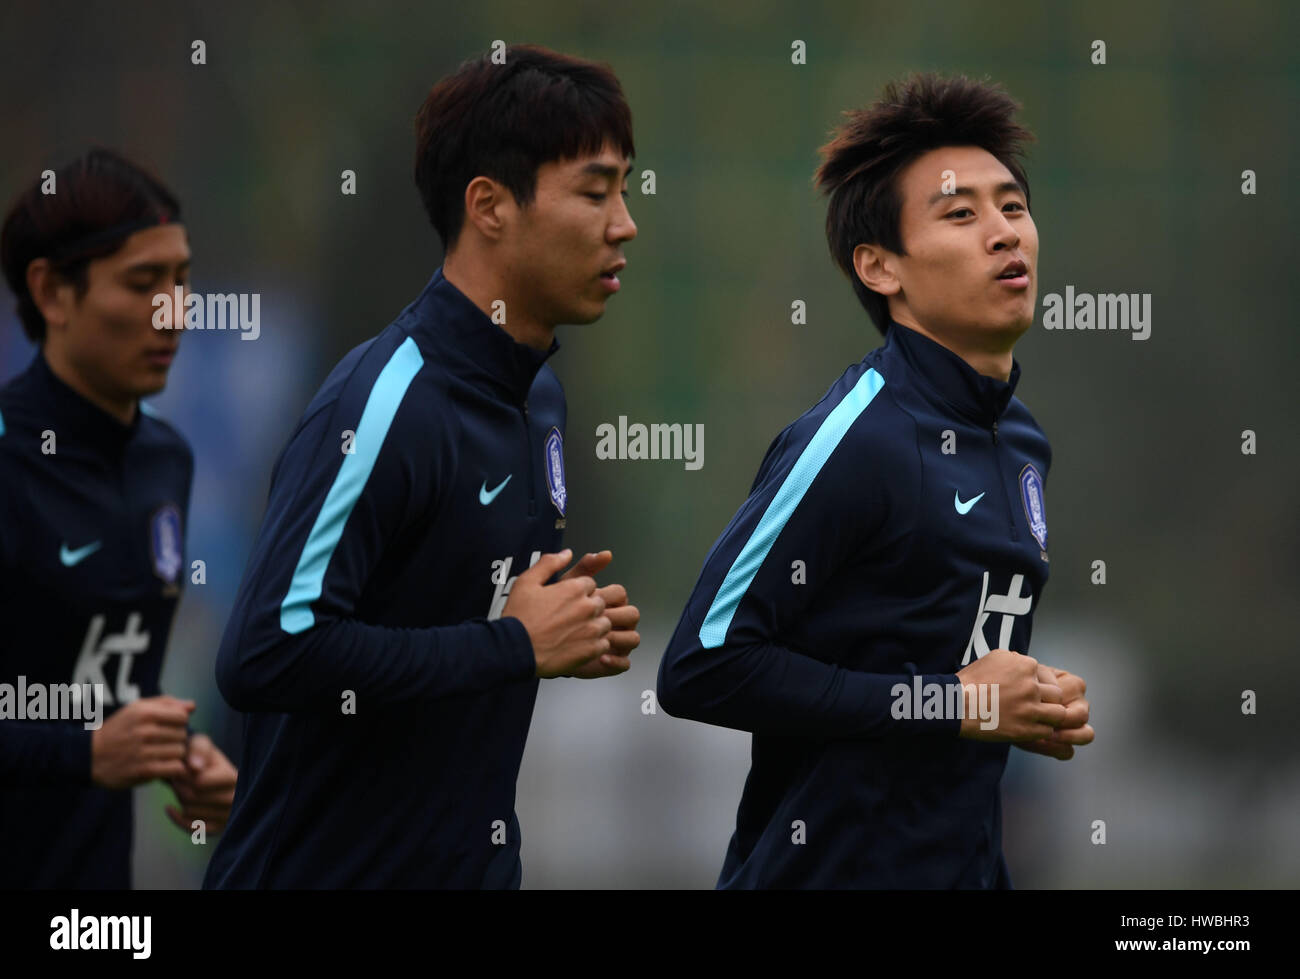 Changsha, China's Hunan Province. 20th Mar, 2017. Koo Ja Cheol(R) of South Korea takes part in the training session for the Russia 2018 World Cup qualifier against China in Changsha, capital of central China's Hunan Province, on March 20, 2017. The match will be held in Changsha next Thursday. Credit: Li Ga/Xinhua/Alamy Live News Stock Photo